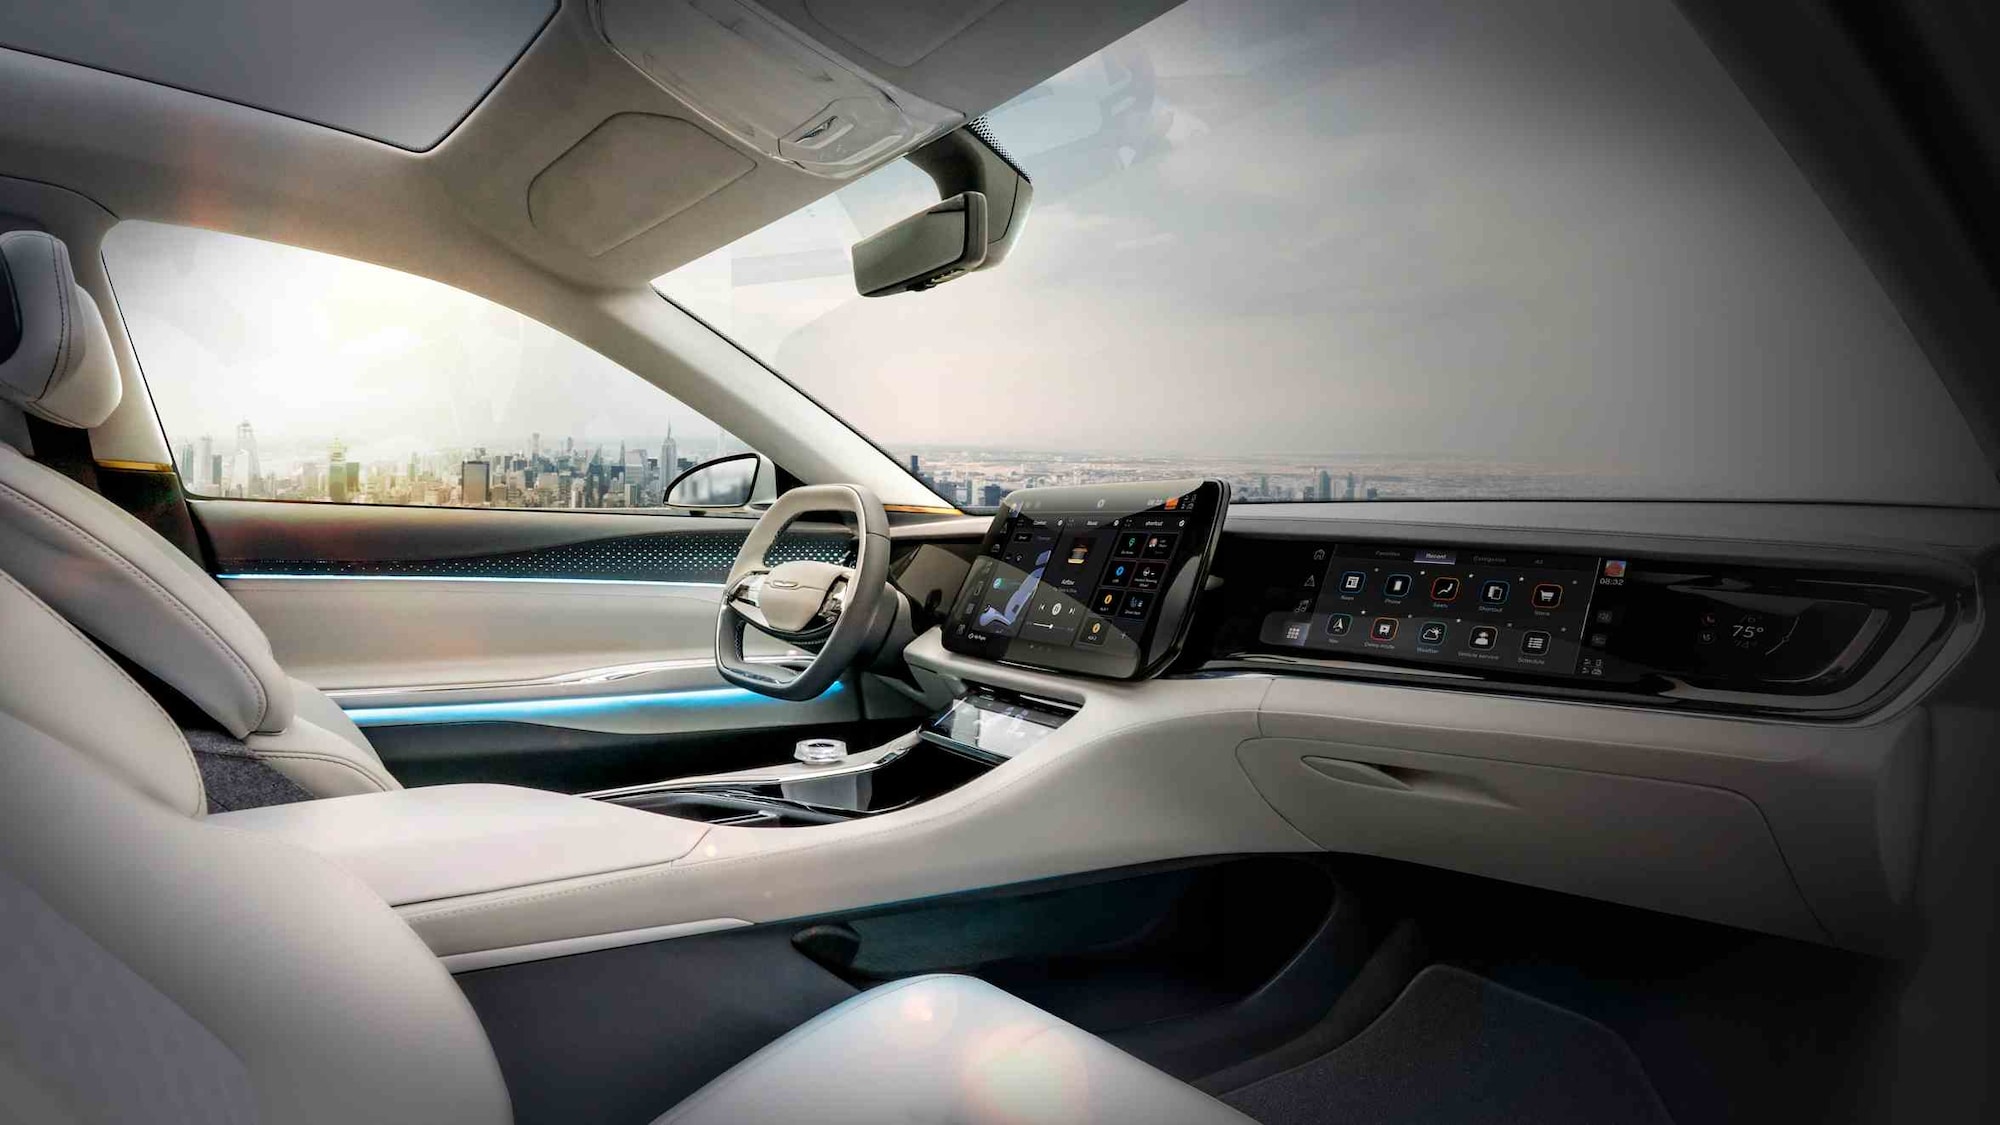 Stellantis and Foxconn will make the smart cockpits available to other carmakers as well. Image: Stellantis